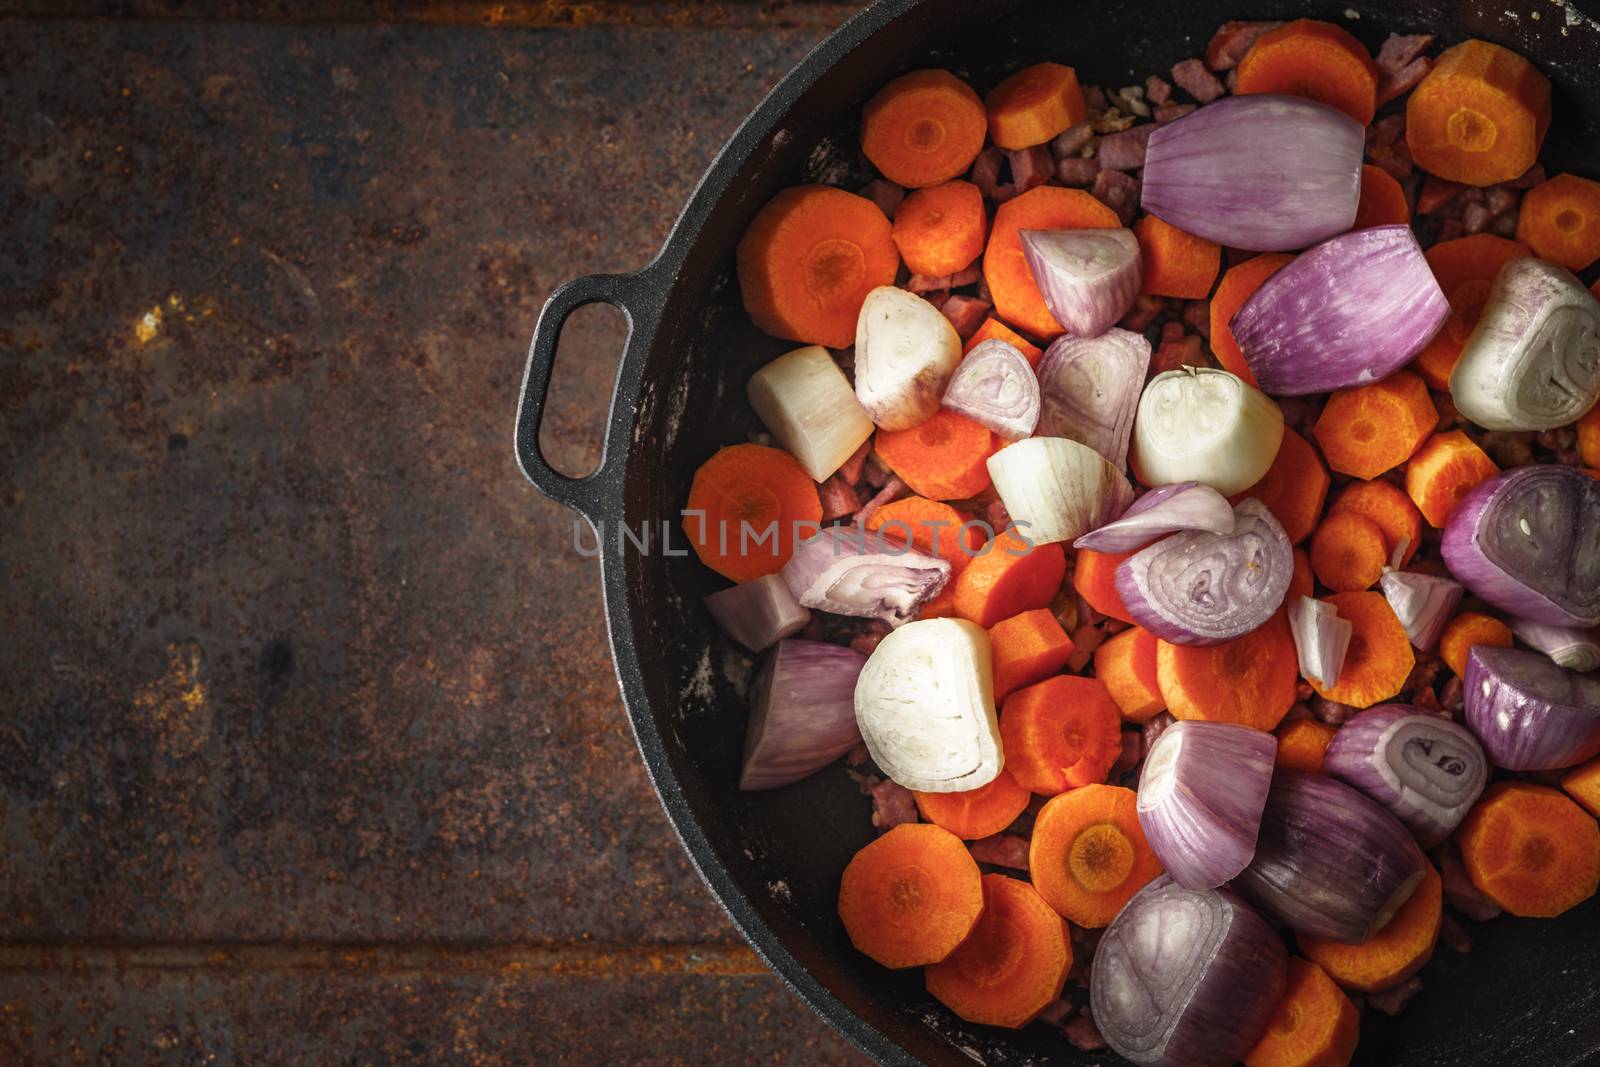 Shallot and carrots in the pan on the metal background by Deniskarpenkov